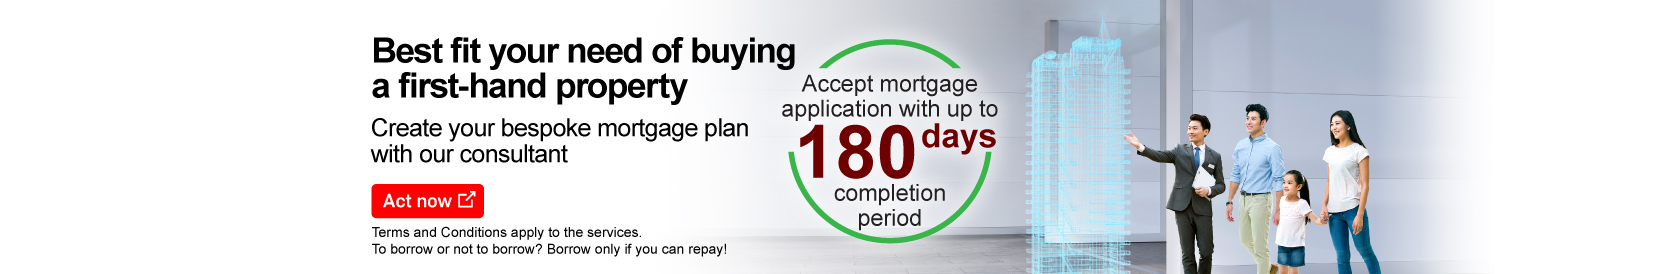 Act now, create your bespoke mortgage plan with our consultant (Opens in a new window)